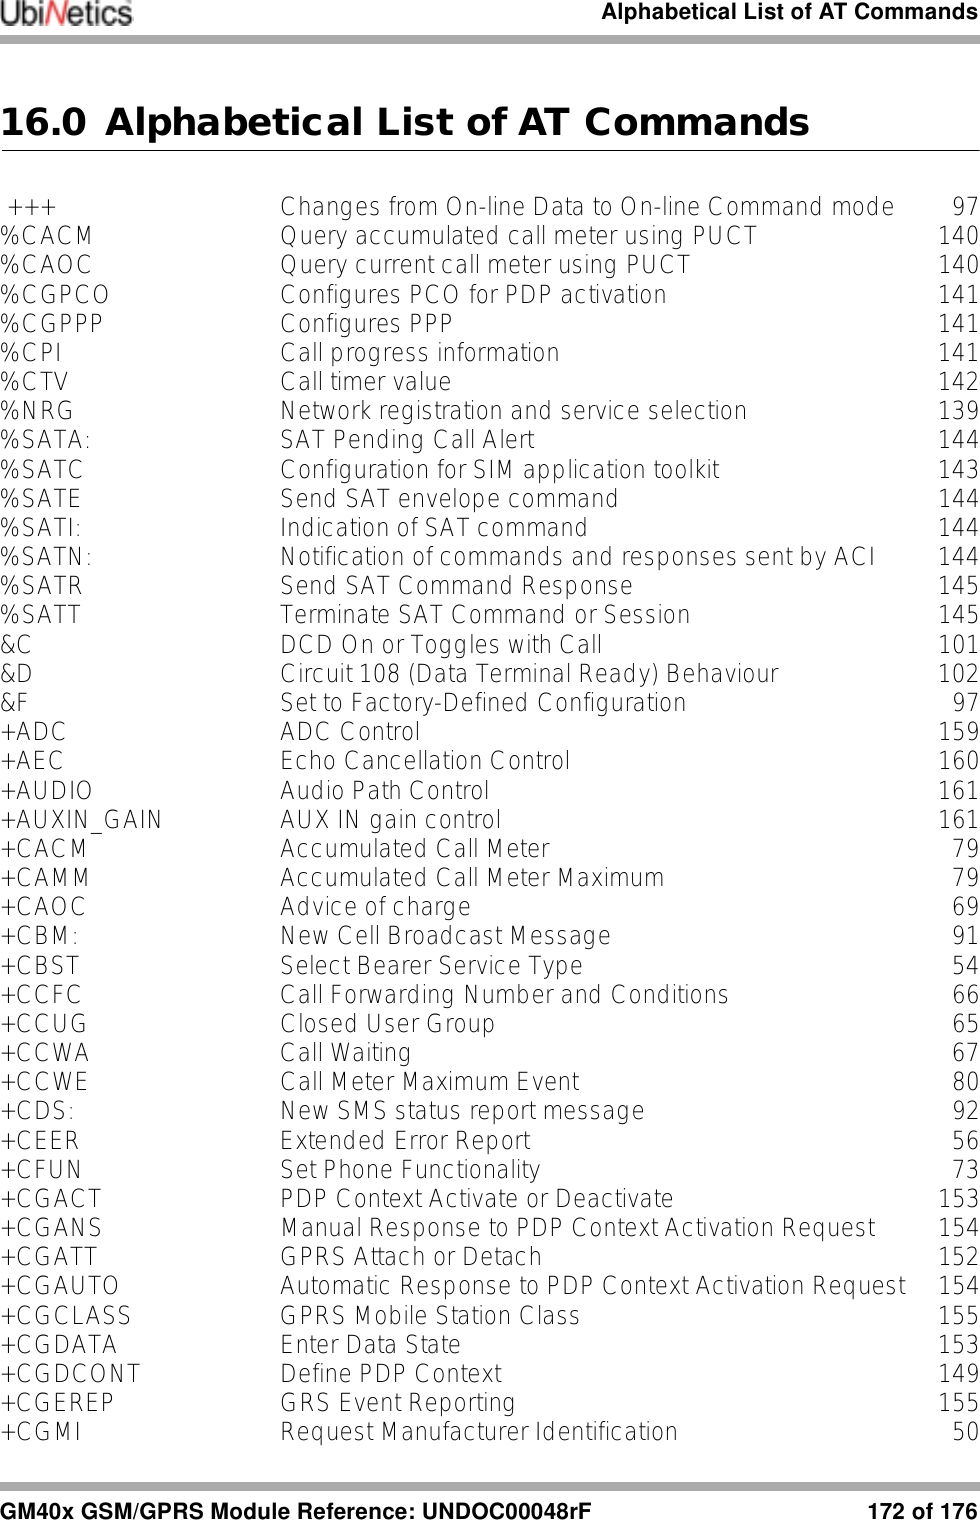 Alphabetical List of AT CommandsGM40x GSM/GPRS Module Reference: UNDOC00048rF 172 of 17616.0 Alphabetical List of AT Commands +++ Changes from On-line Data to On-line Command mode 97%CACM Query accumulated call meter using PUCT 140%CAOC Query current call meter using PUCT 140%CGPCO Configures PCO for PDP activation 141%CGPPP Configures PPP 141%CPI Call progress information 141%CTV Call timer value 142%NRG Network registration and service selection 139%SATA: SAT Pending Call Alert 144%SATC Configuration for SIM application toolkit 143%SATE Send SAT envelope command 144%SATI: Indication of SAT command 144%SATN: Notification of commands and responses sent by ACI 144%SATR Send SAT Command Response 145%SATT Terminate SAT Command or Session 145&amp;C DCD On or Toggles with Call 101&amp;D Circuit 108 (Data Terminal Ready) Behaviour 102&amp;F Set to Factory-Defined Configuration 97+ADC ADC Control 159+AEC Echo Cancellation Control 160+AUDIO Audio Path Control 161+AUXIN_GAIN AUX IN gain control 161+CACM Accumulated Call Meter 79+CAMM Accumulated Call Meter Maximum 79+CAOC Advice of charge 69+CBM: New Cell Broadcast Message 91+CBST Select Bearer Service Type 54+CCFC Call Forwarding Number and Conditions 66+CCUG Closed User Group 65+CCWA Call Waiting 67+CCWE Call Meter Maximum Event 80+CDS: New SMS status report message 92+CEER Extended Error Report 56+CFUN Set Phone Functionality 73+CGACT PDP Context Activate or Deactivate 153+CGANS Manual Response to PDP Context Activation Request 154+CGATT GPRS Attach or Detach 152+CGAUTO Automatic Response to PDP Context Activation Request 154+CGCLASS GPRS Mobile Station Class 155+CGDATA Enter Data State 153+CGDCONT Define PDP Context 149+CGEREP GRS Event Reporting 155+CGMI Request Manufacturer Identification 50